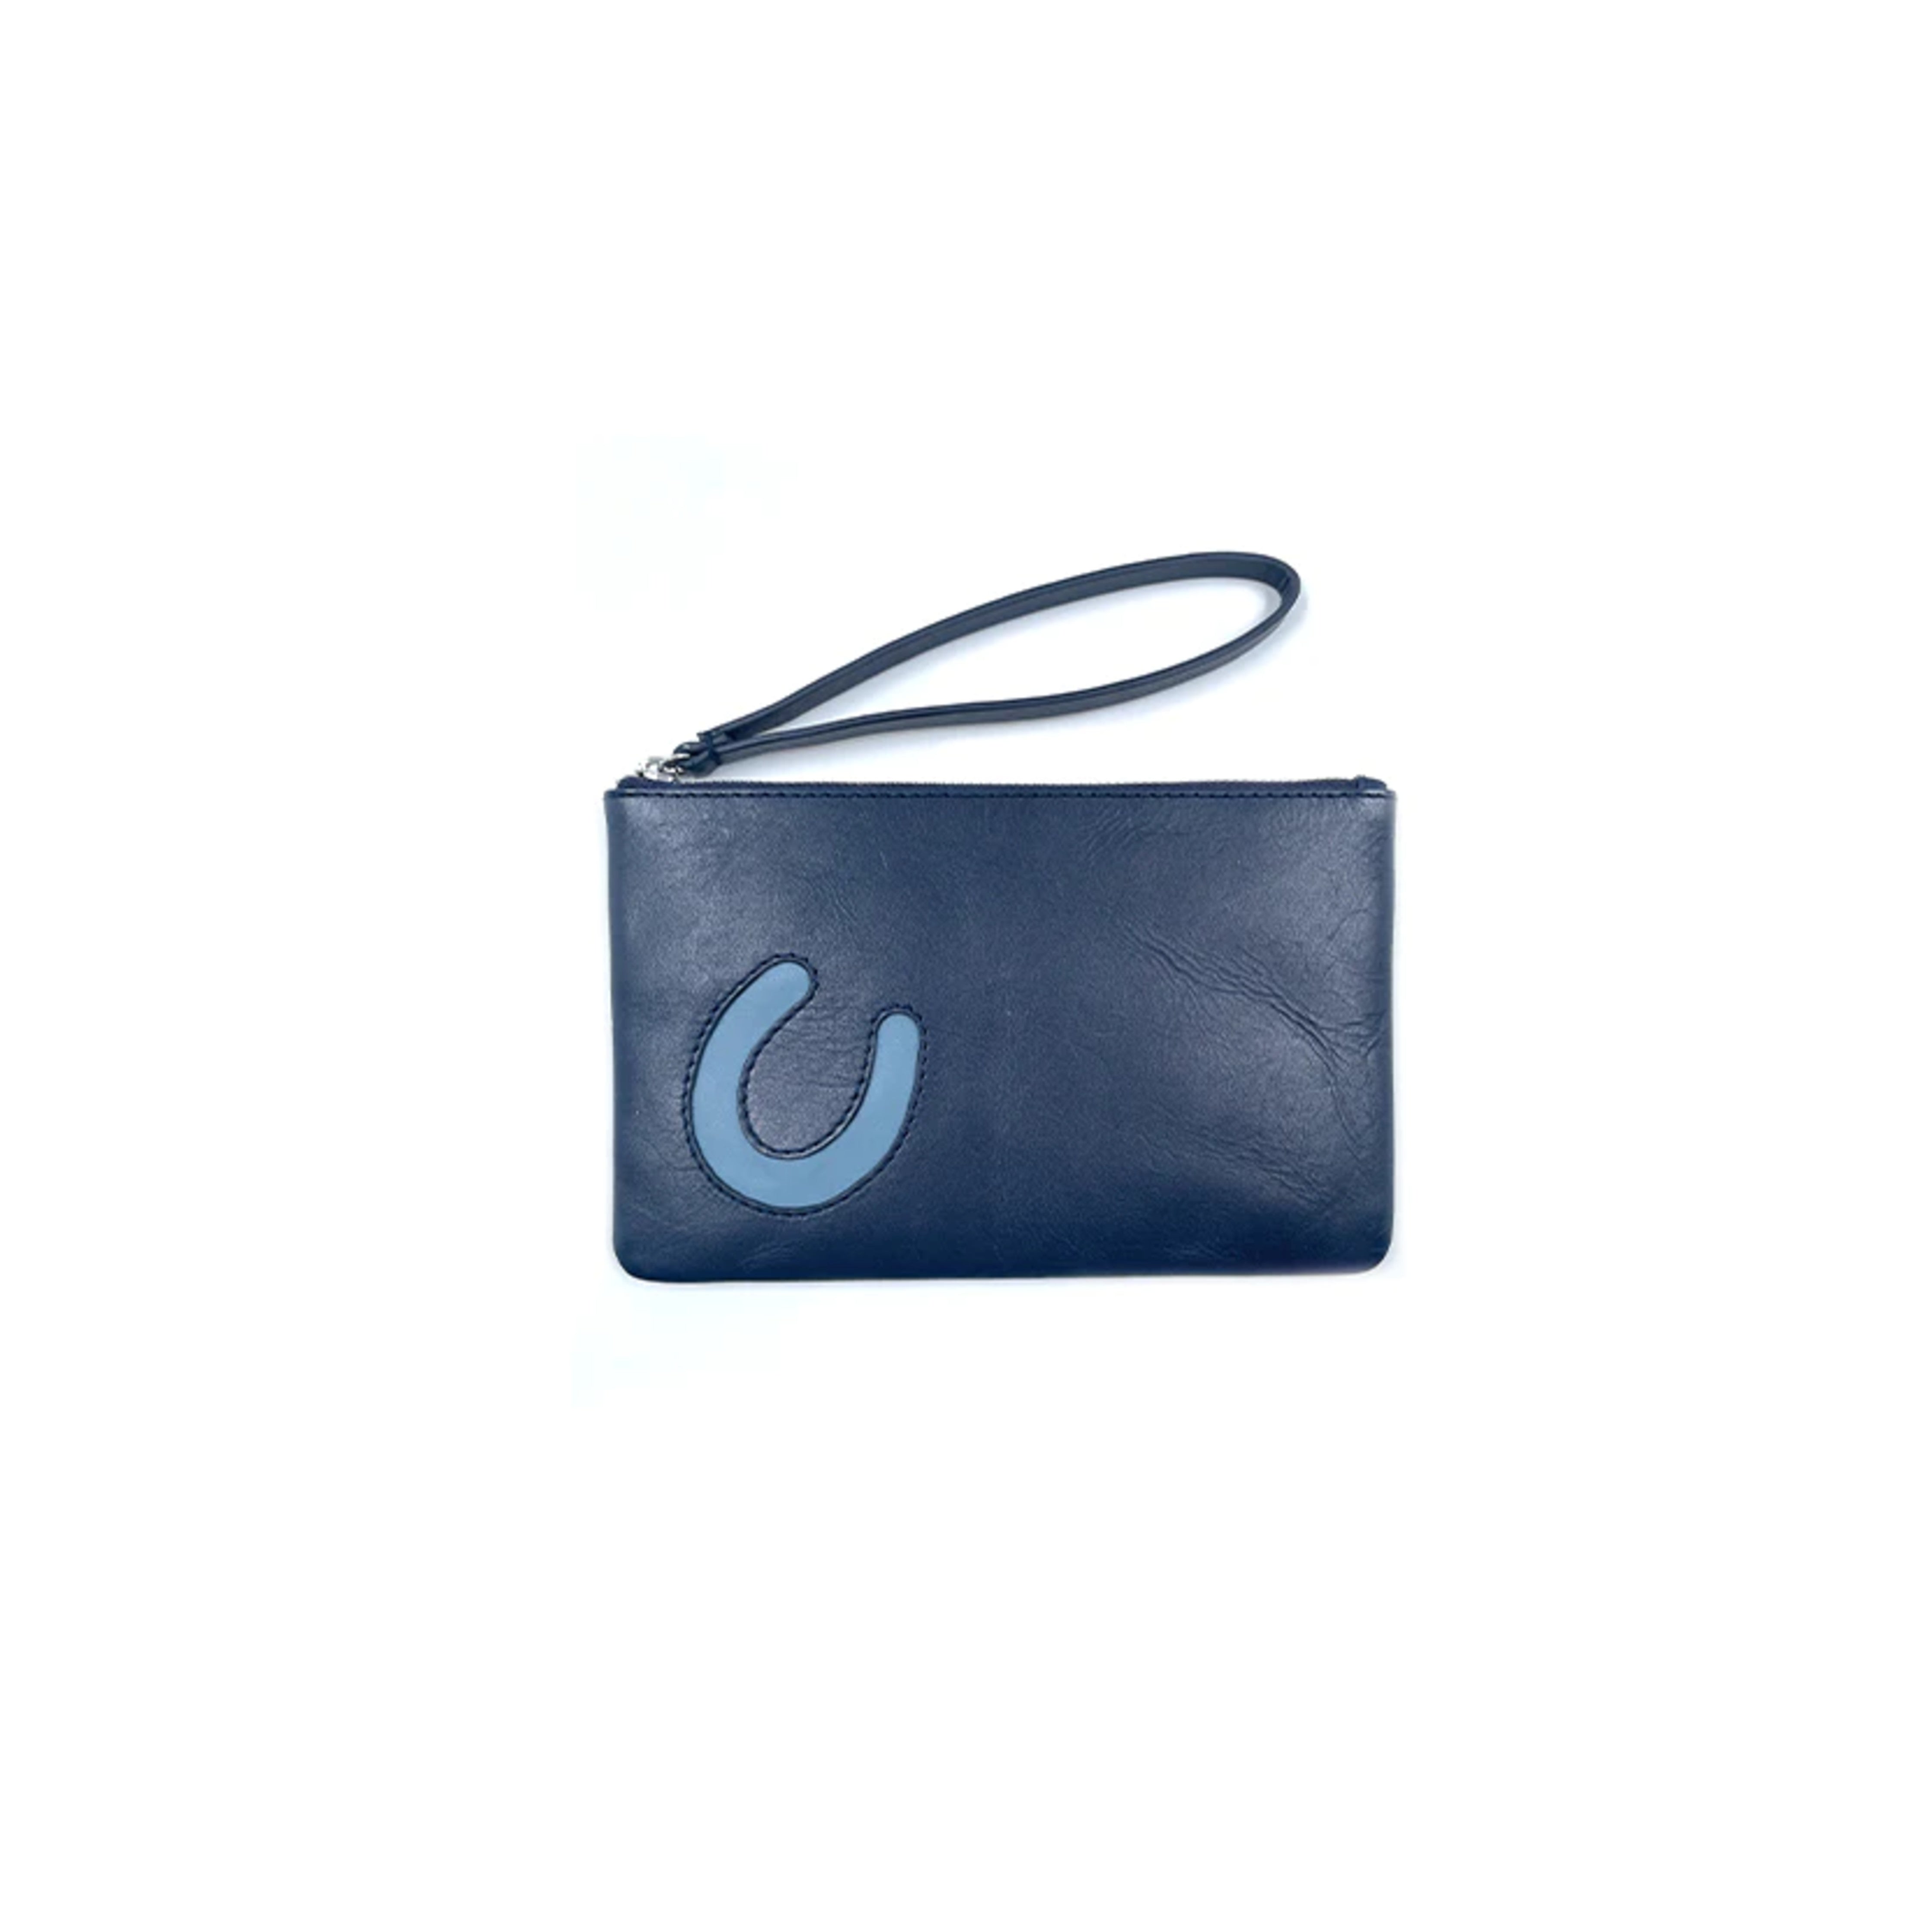 Get the Gallop Wristlet